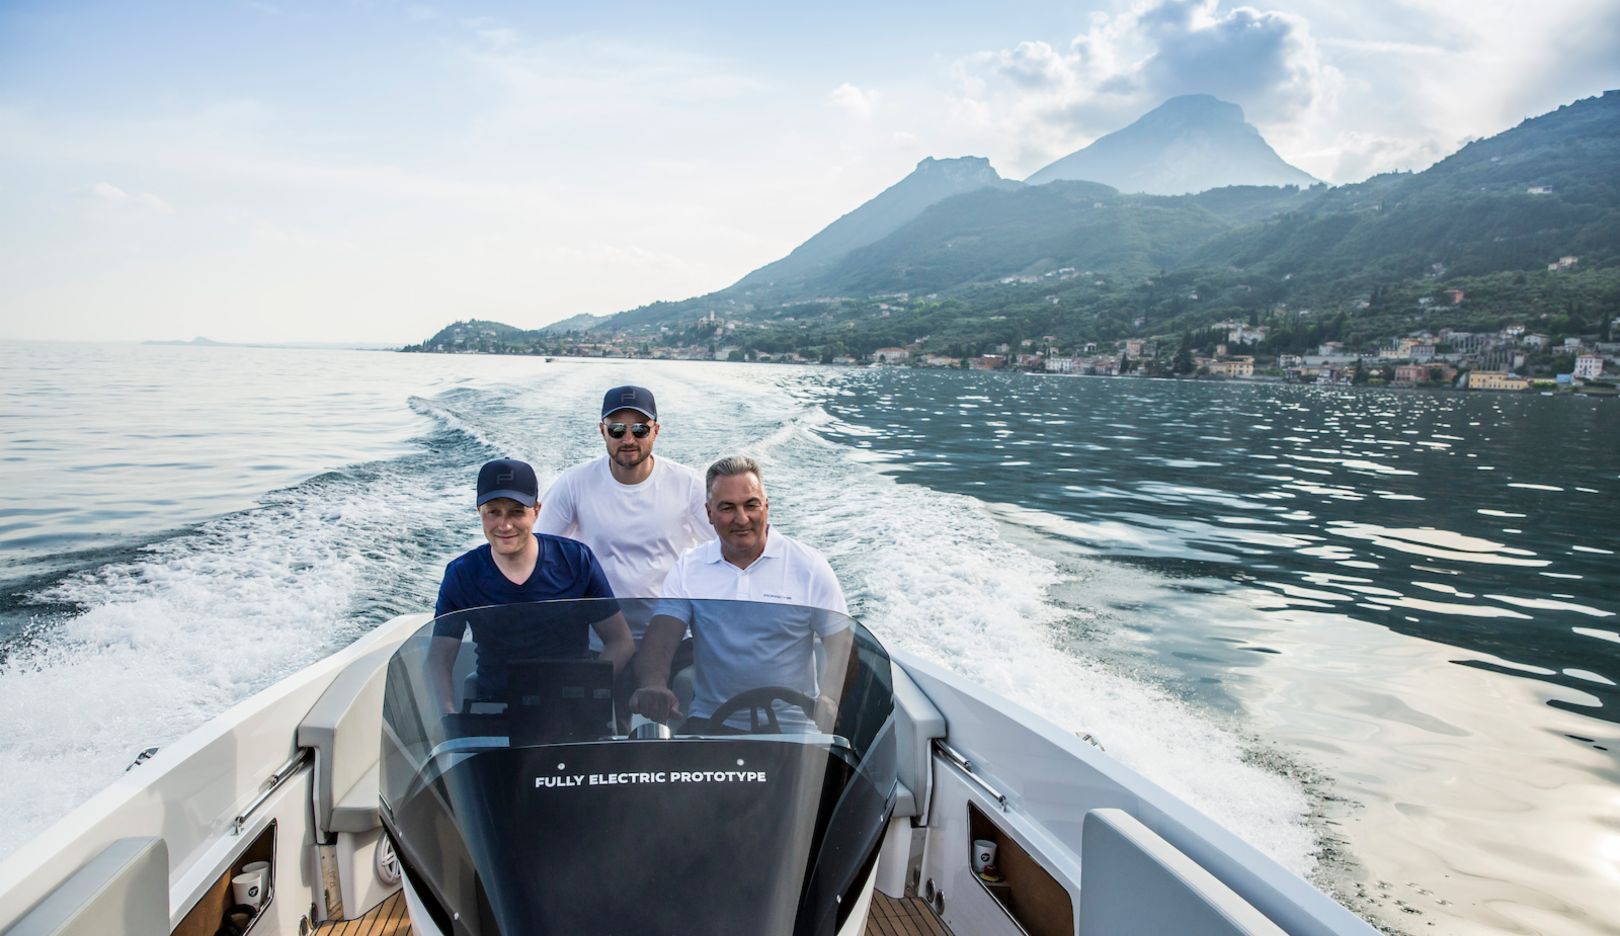 Moving dynamically across Lake Garda: Engine noise is a thing of the past.